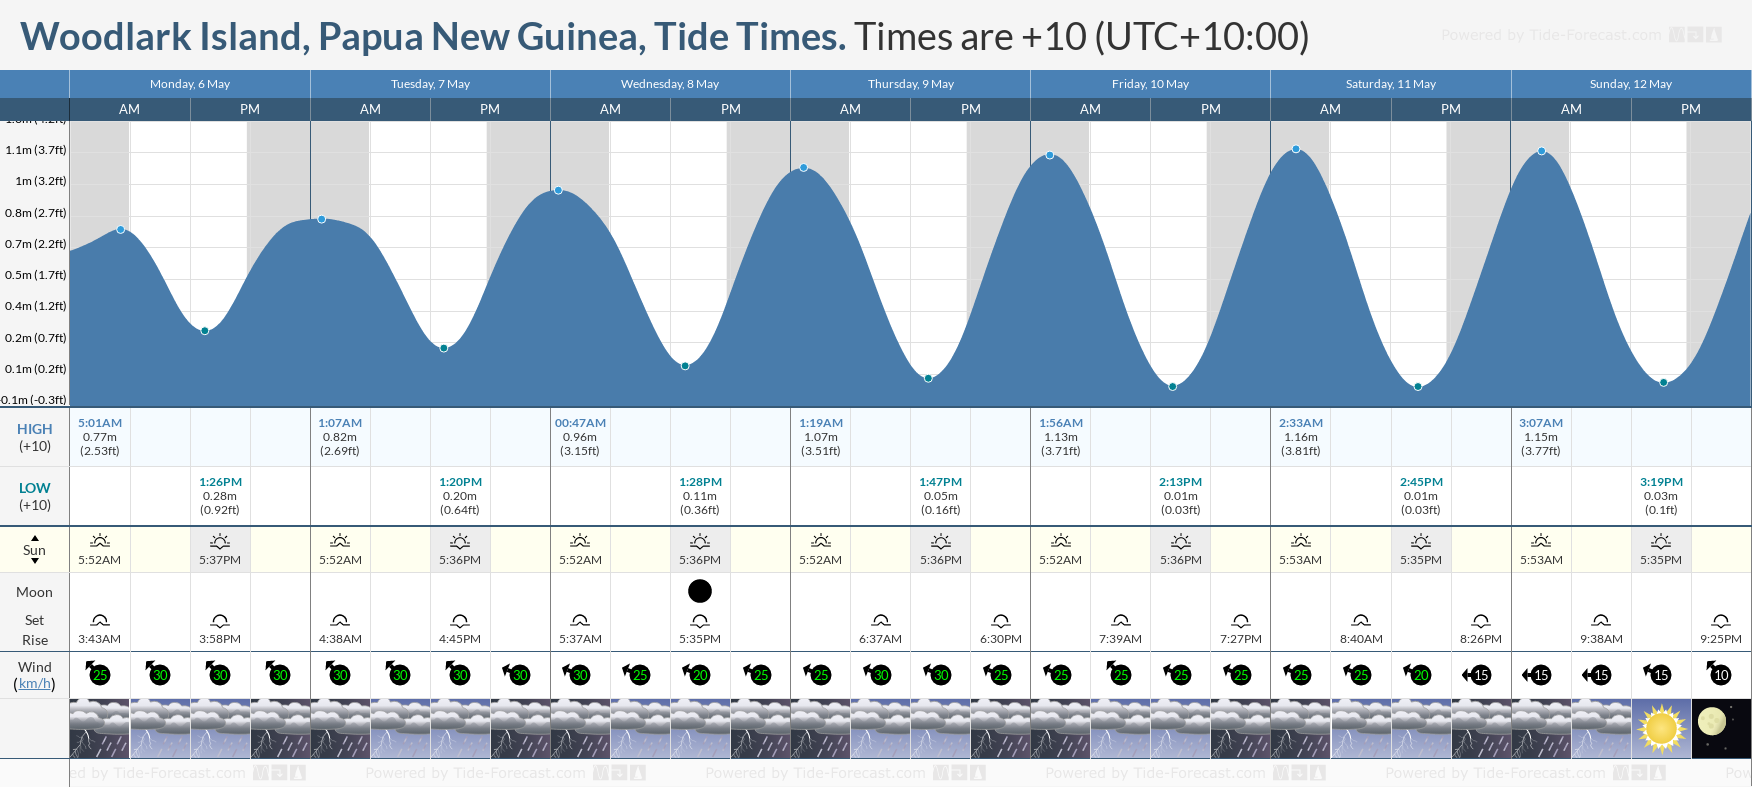 Woodlark Island, Papua New Guinea Tide Chart including high and low tide times for the next 7 days